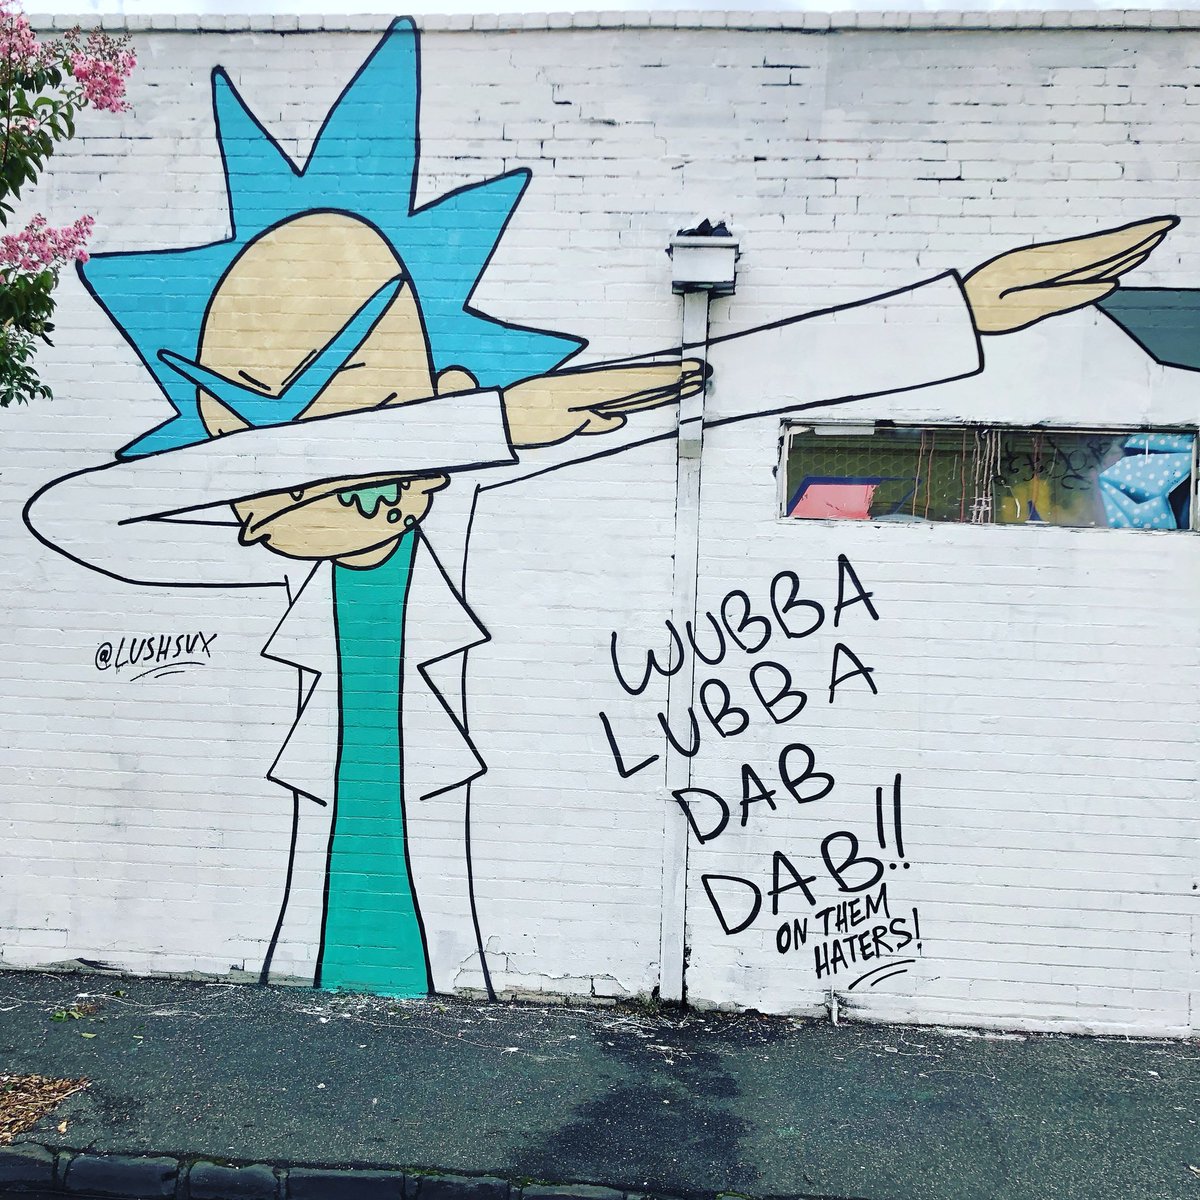 Lushsux On Twitter Is This The Most Cursed Wall In Existence Now